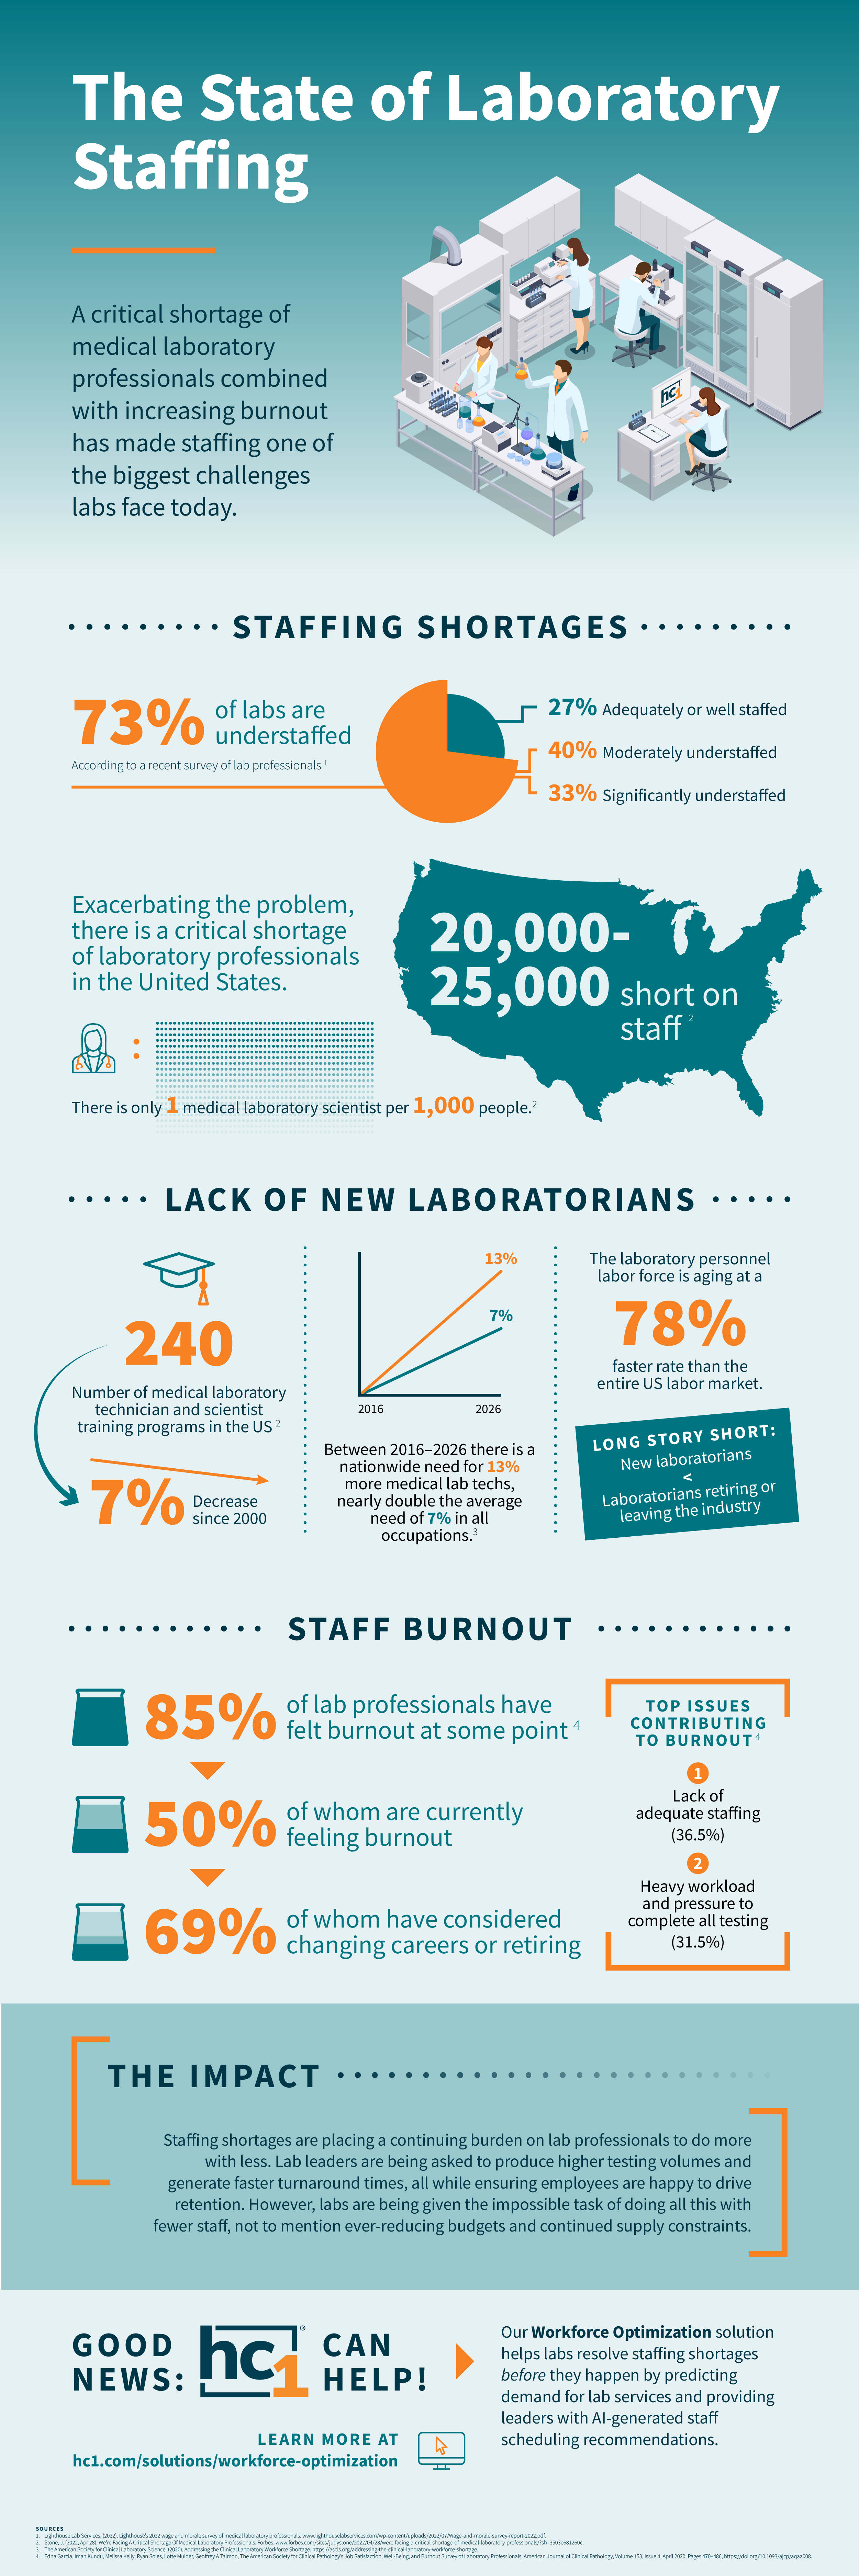 A critical shortage of medical laboratory professionals combined with increasing burnout has made staffing one of the biggest challenges labs face today. Several factors make lab staff scheduling difficult, including laboratory staffing shortages, a lack of new laboratorians, and staff burnout.